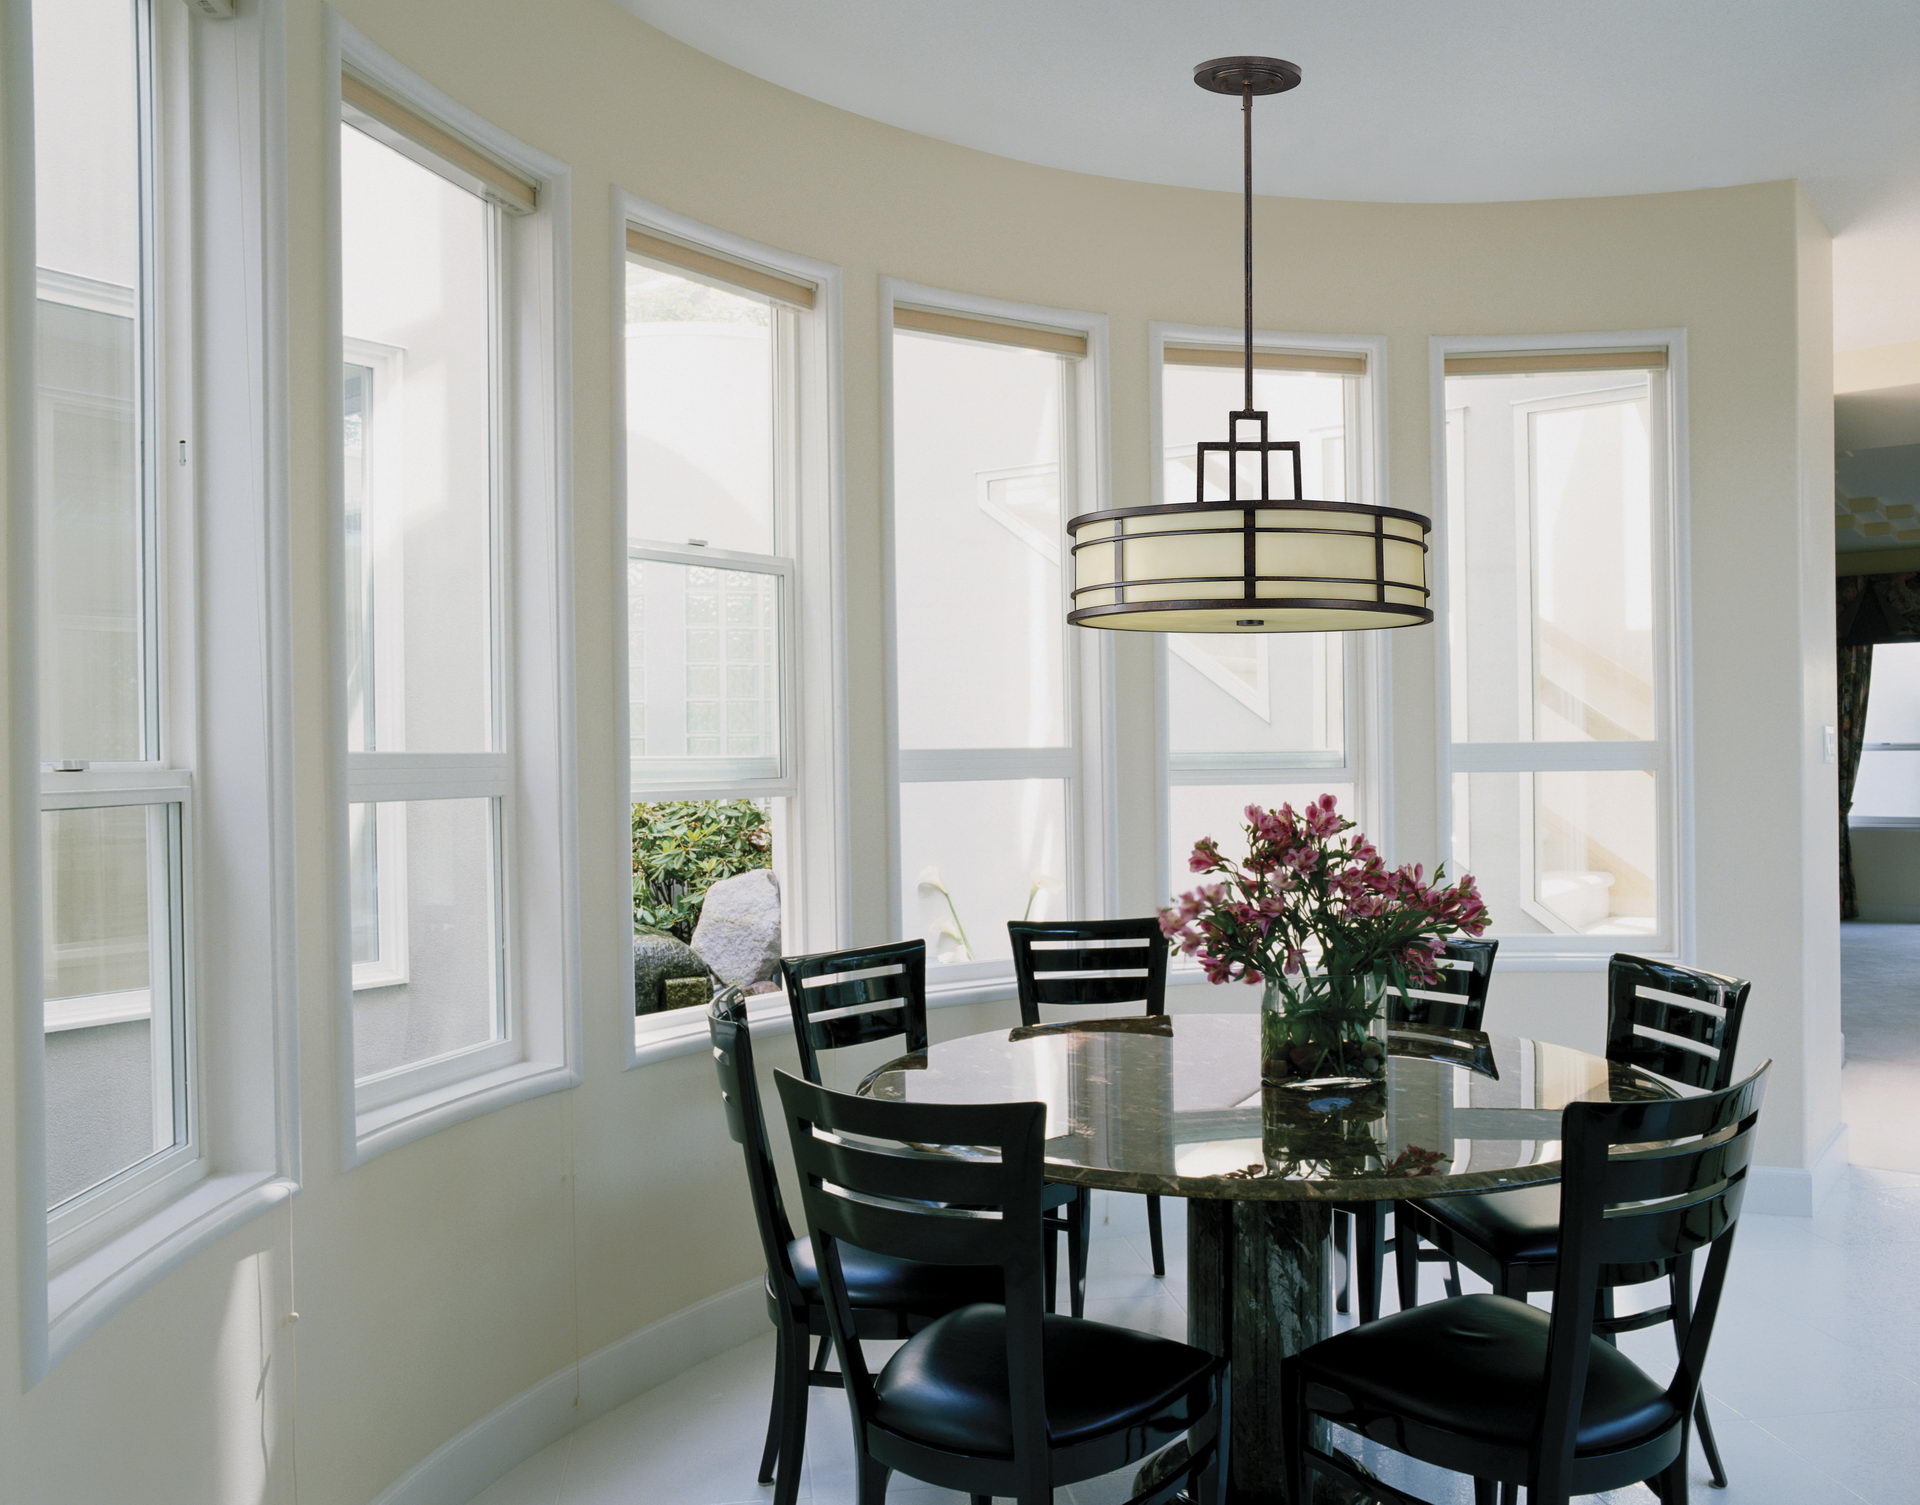 Best Light Fixtures for Your Dining Room - Interior Design Inspirations